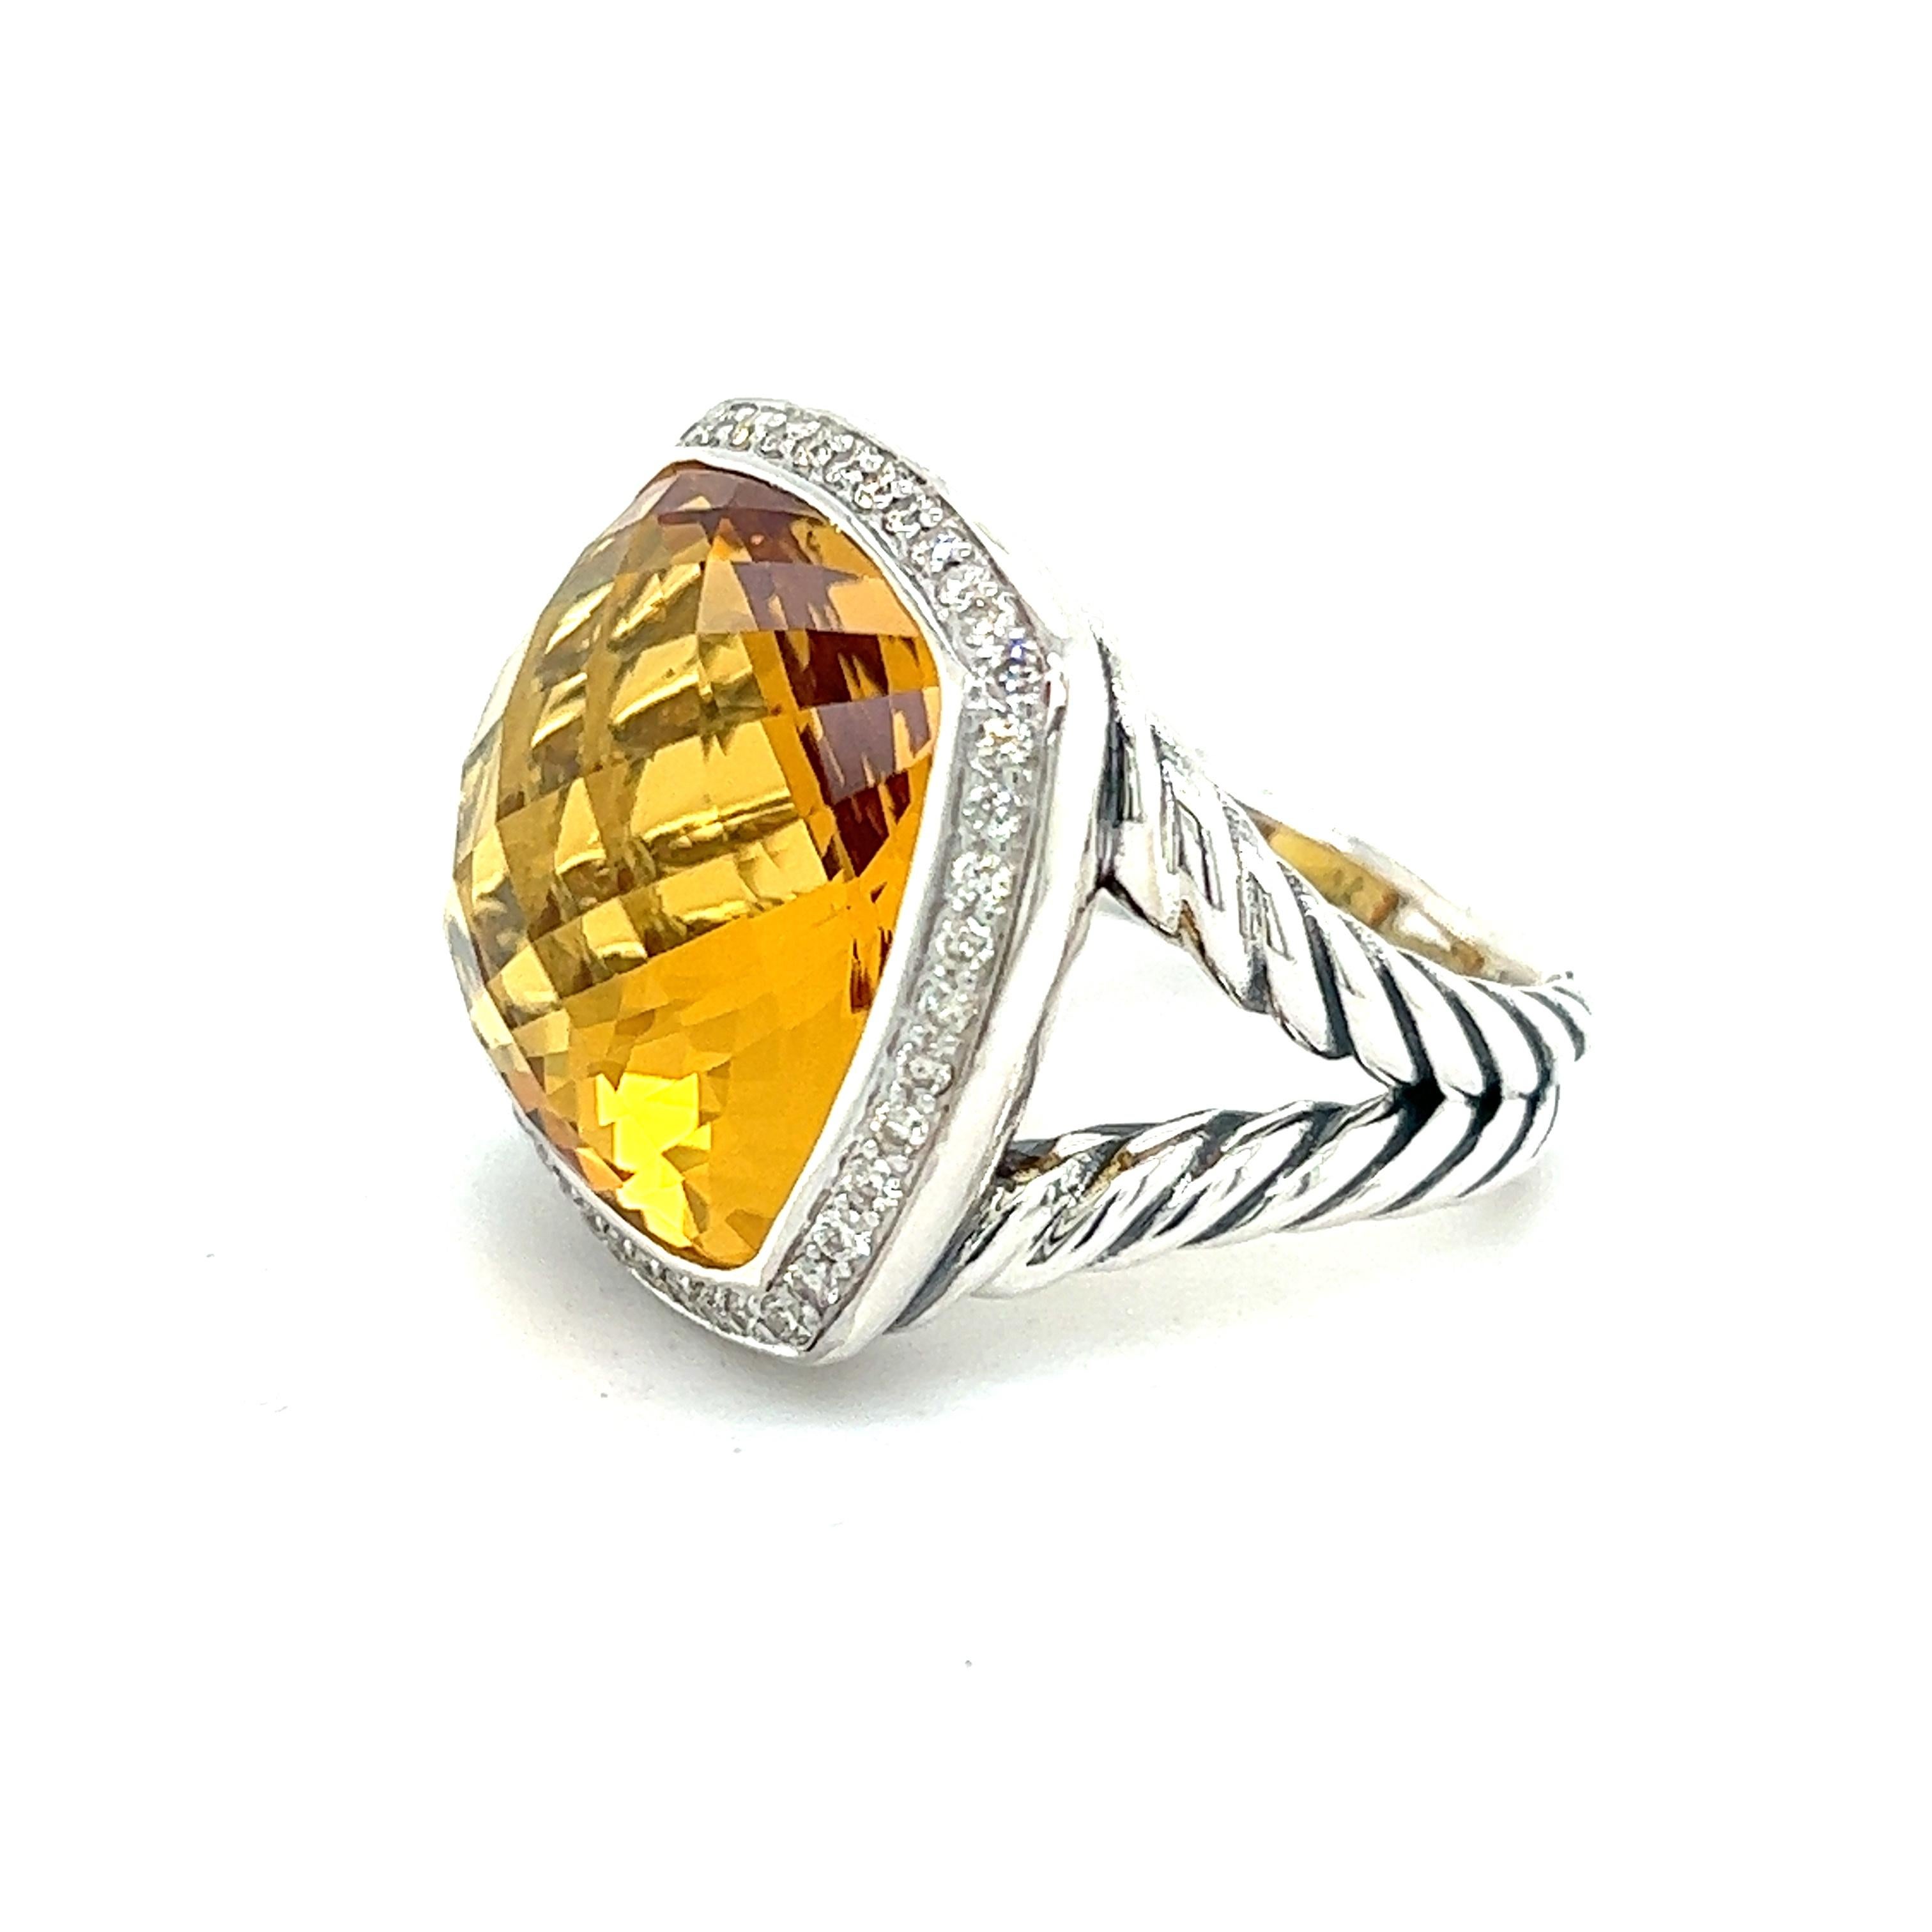 Authentic David Yurman Estate Citrine Albion Ring Size 5.5 17 mm Silver DY200

Retail: $2,400

ALBION COLLECTION Large 17 mm

This elegant Authentic David Yurman ring is made of sterling silver.

TRUSTED SELLER SINCE 2002

PLEASE SEE OUR HUNDREDS OF